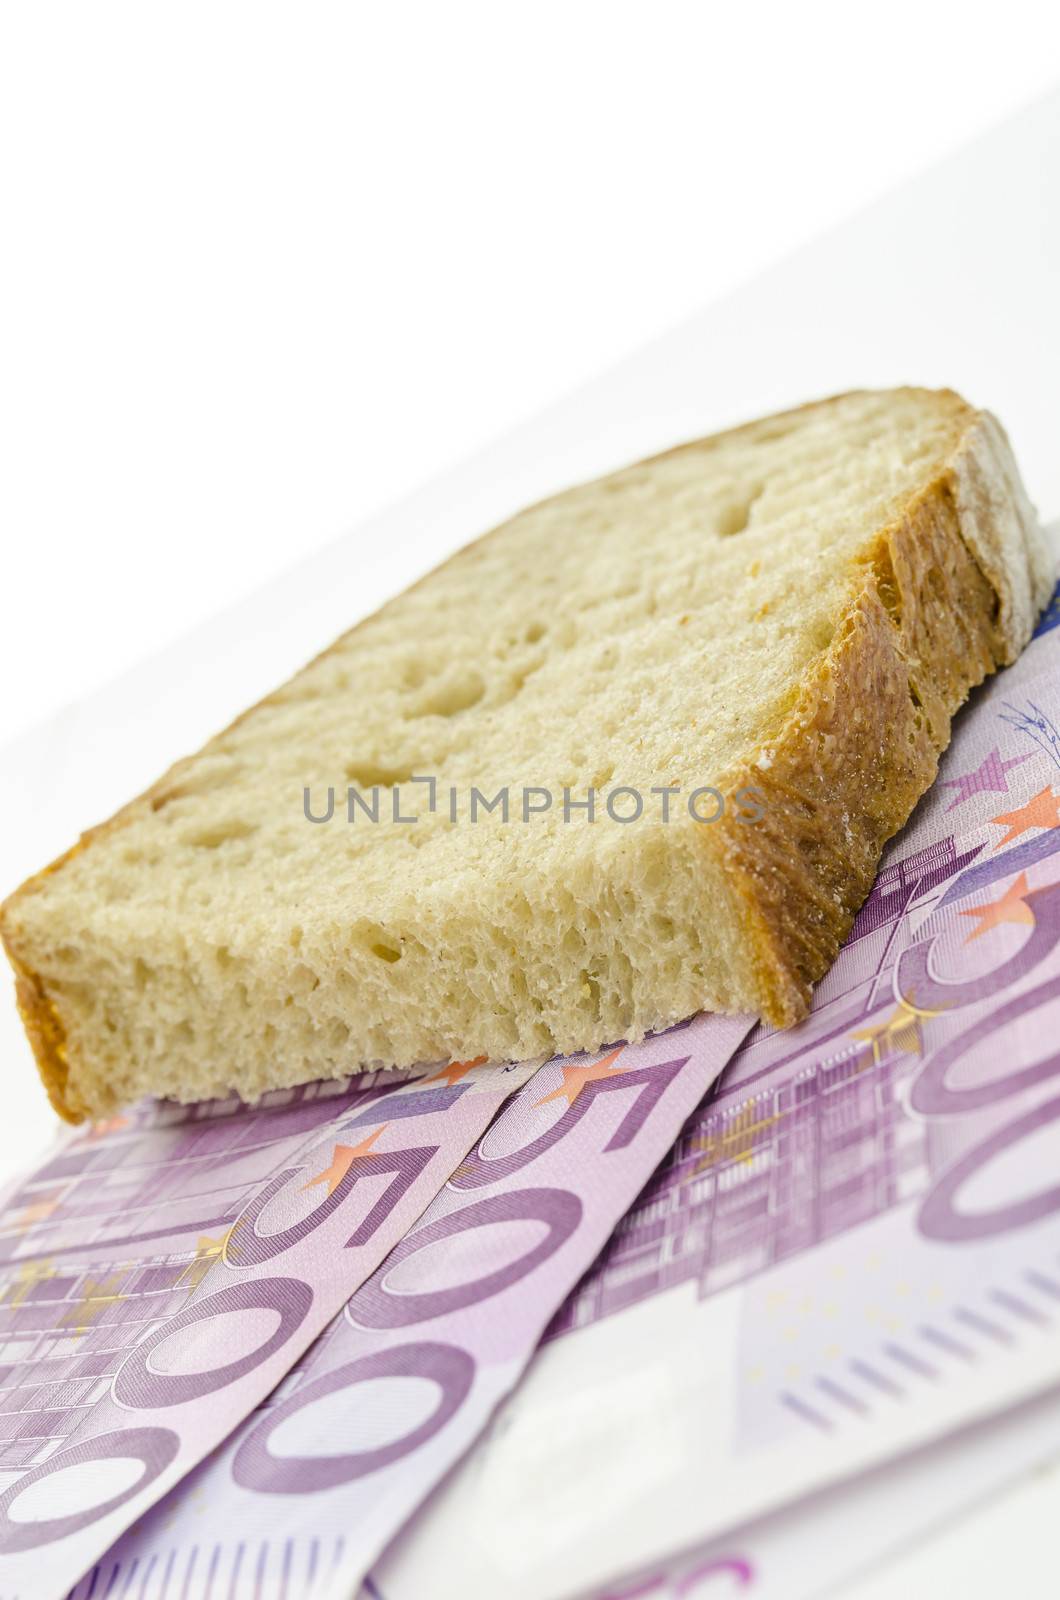 Piece of brad on Euro banknotes. Concept of large food expenses.